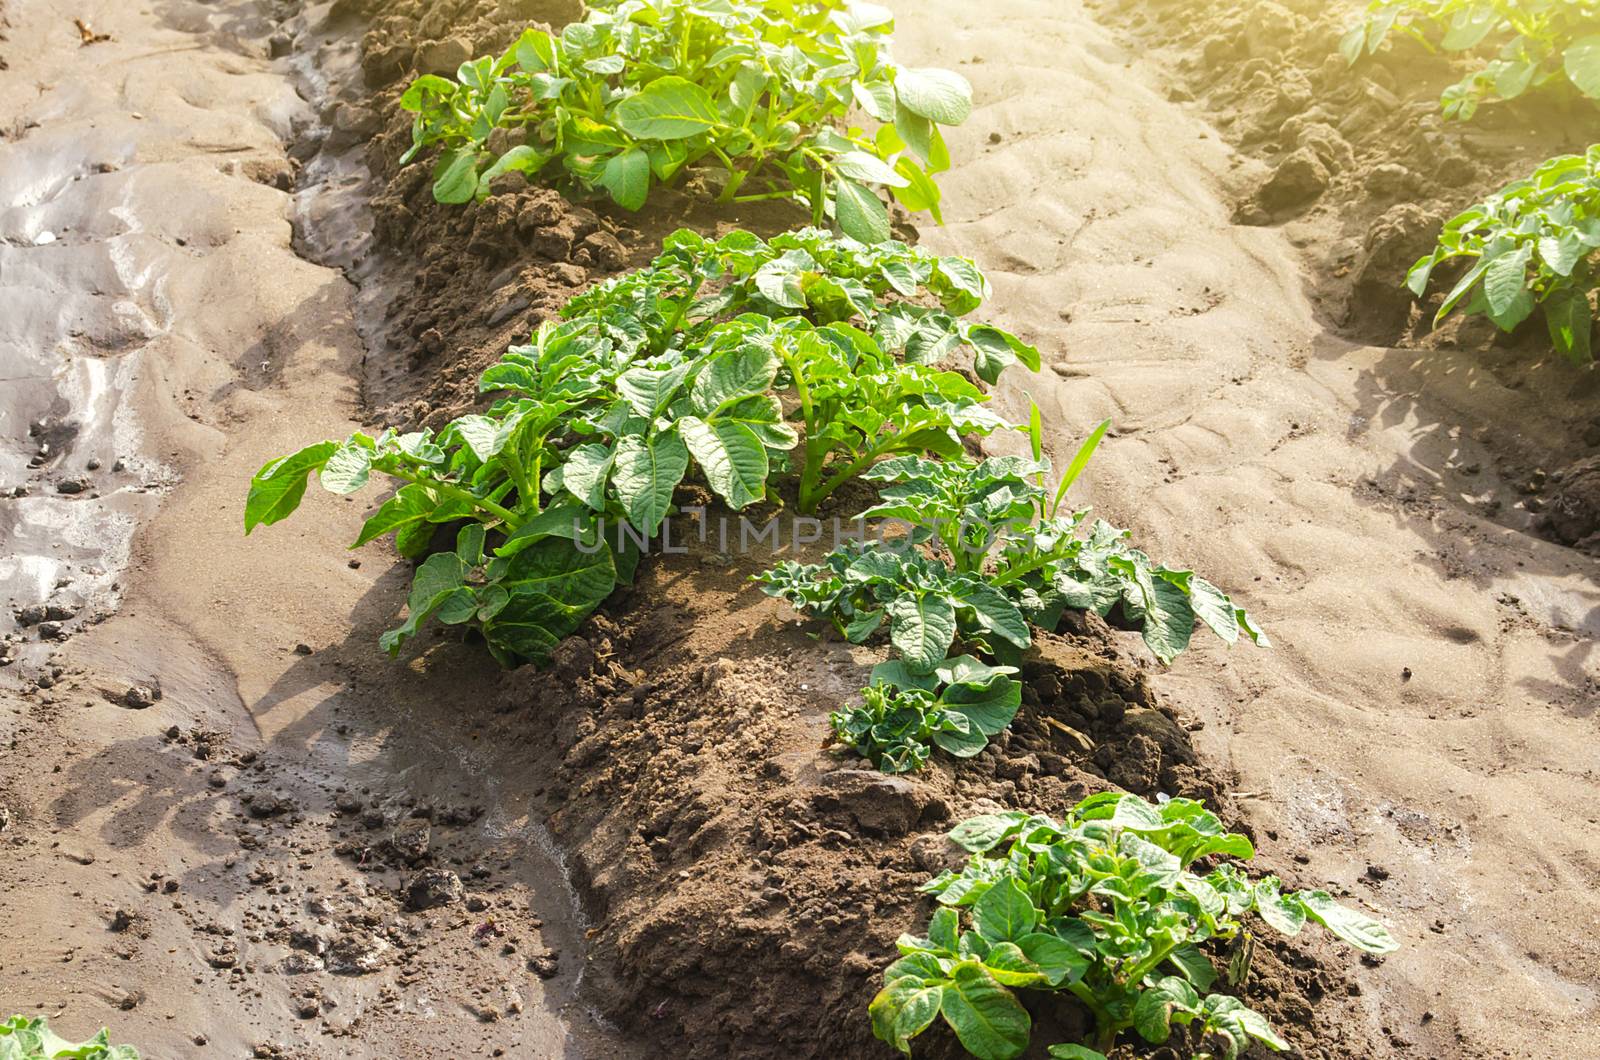 Potato plantation on a farm field. Cultivation and care, harvesting in late spring. Agroindustry and agribusiness. Agriculture, growing food vegetables. Organic farming products. Watering irrigation